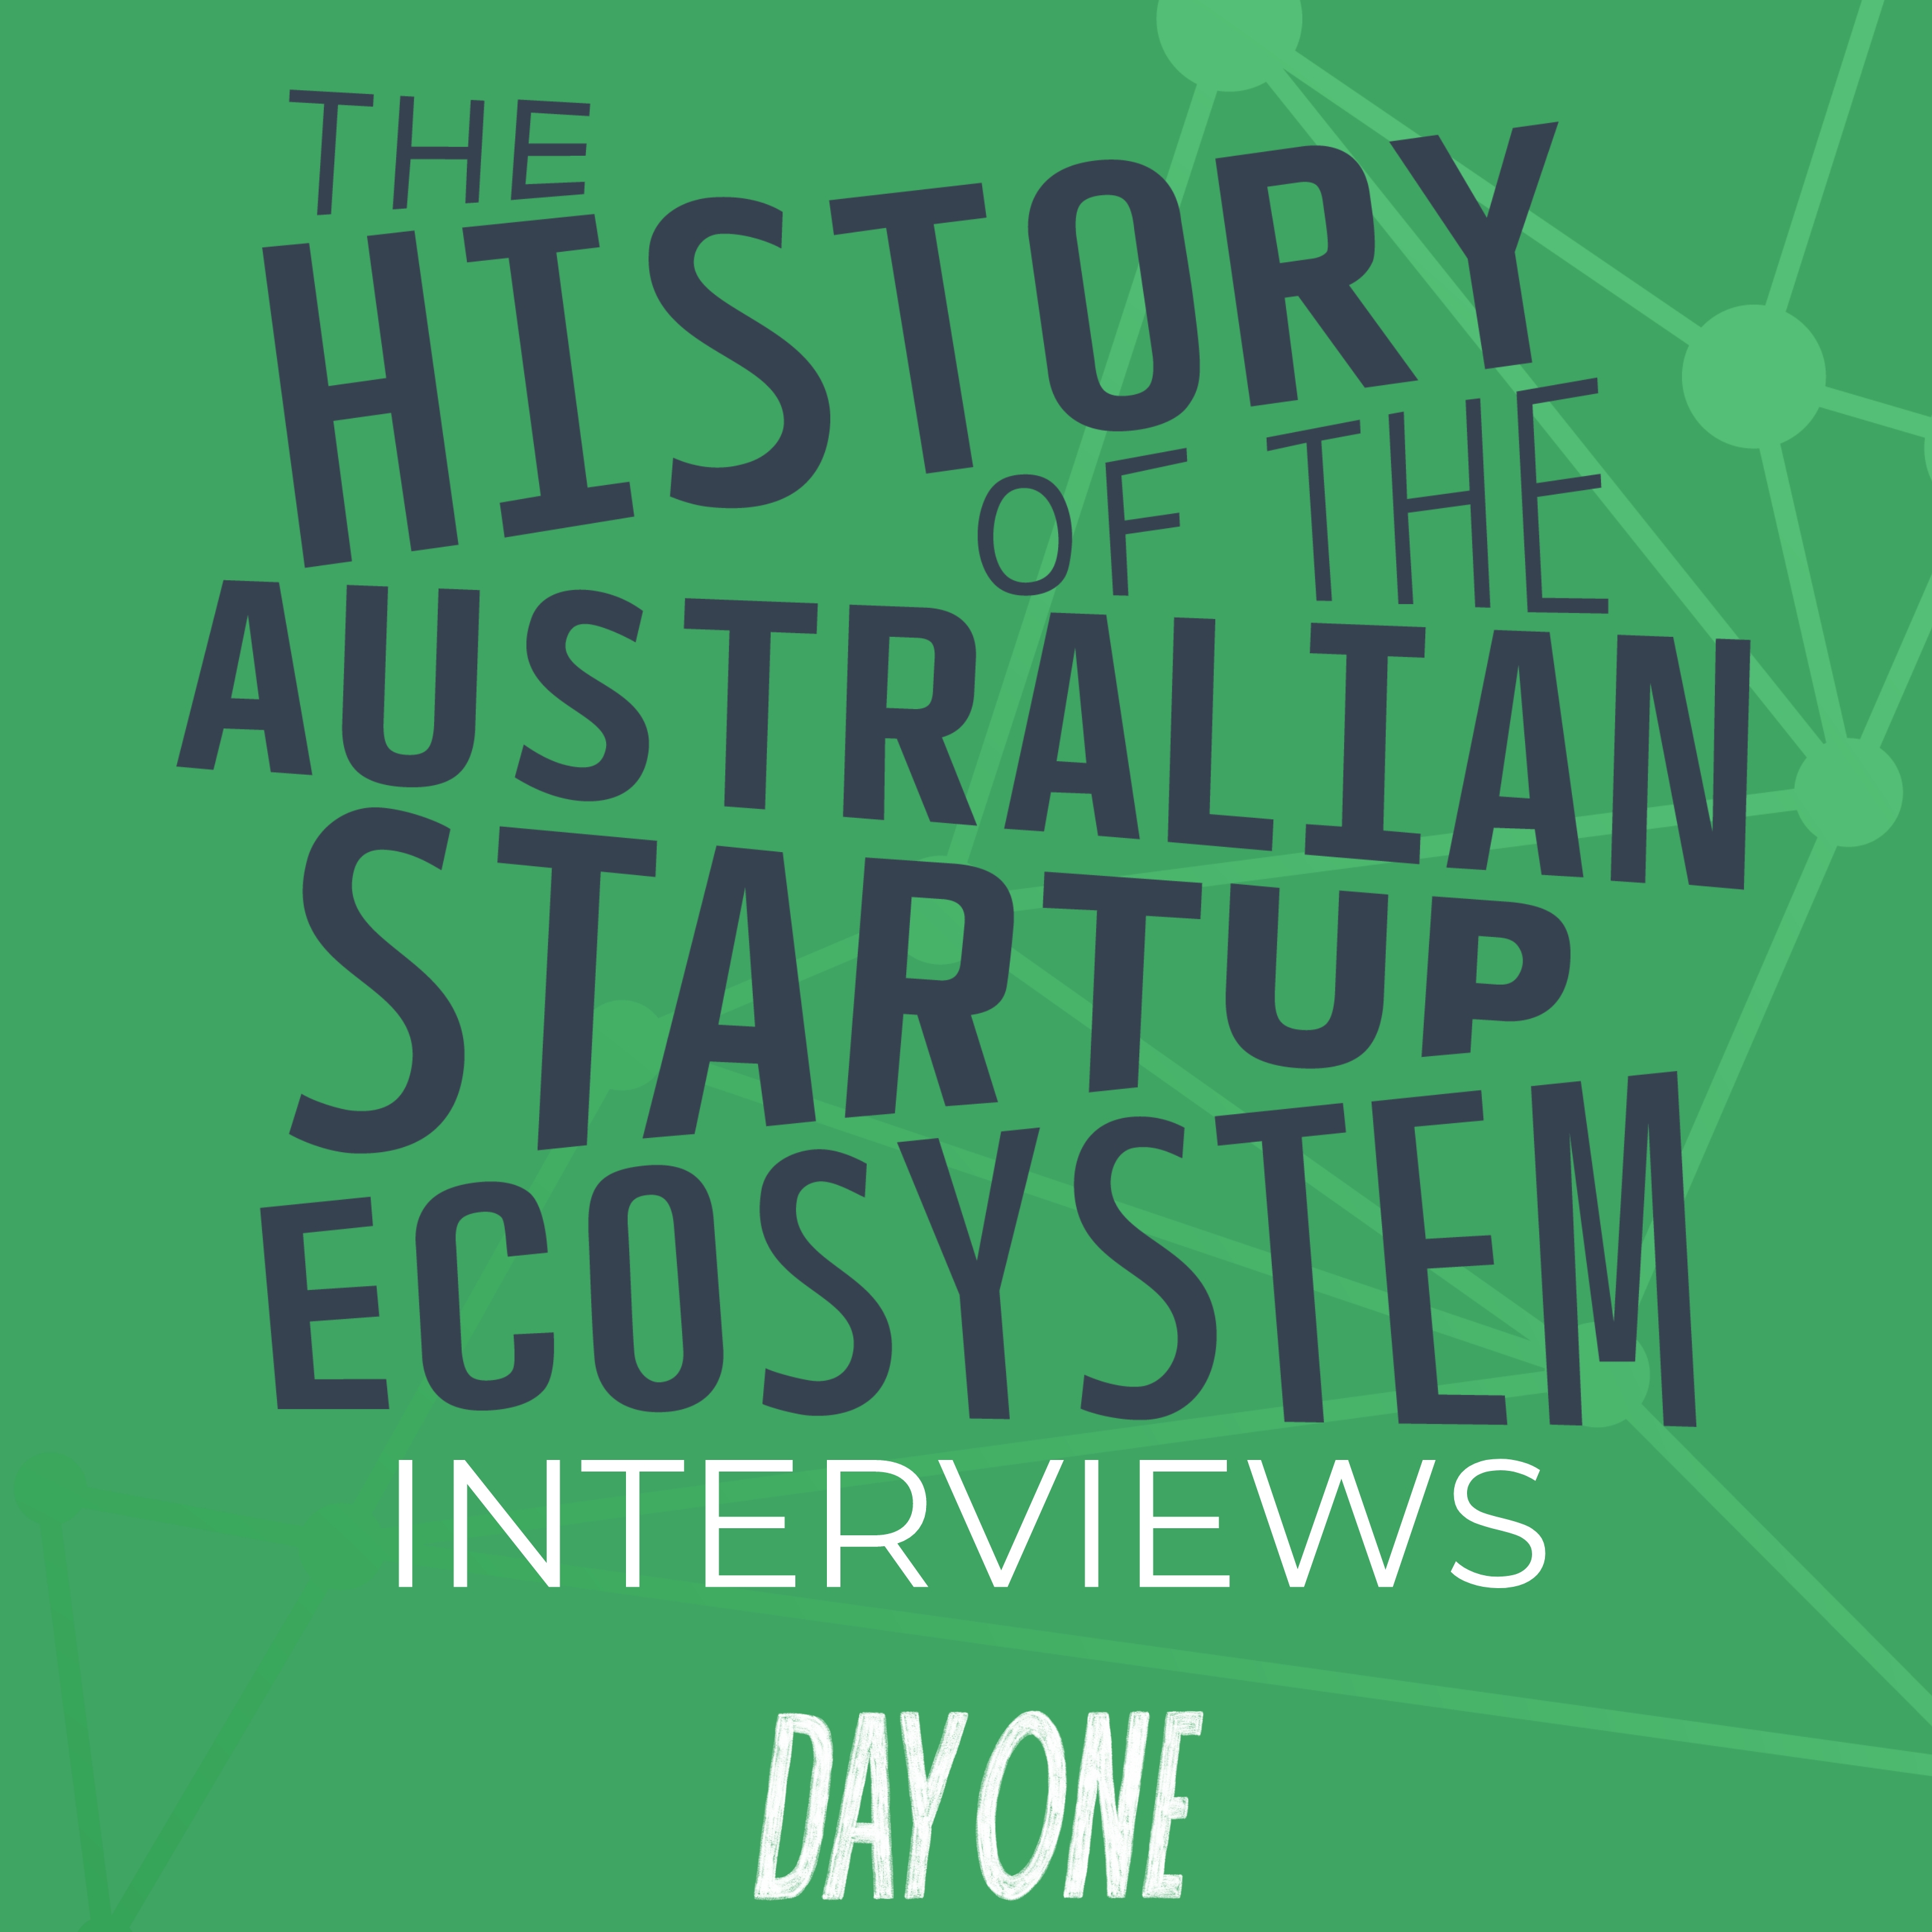 Don Wright believes the various startup ecosystems within Australia should work cooperatively